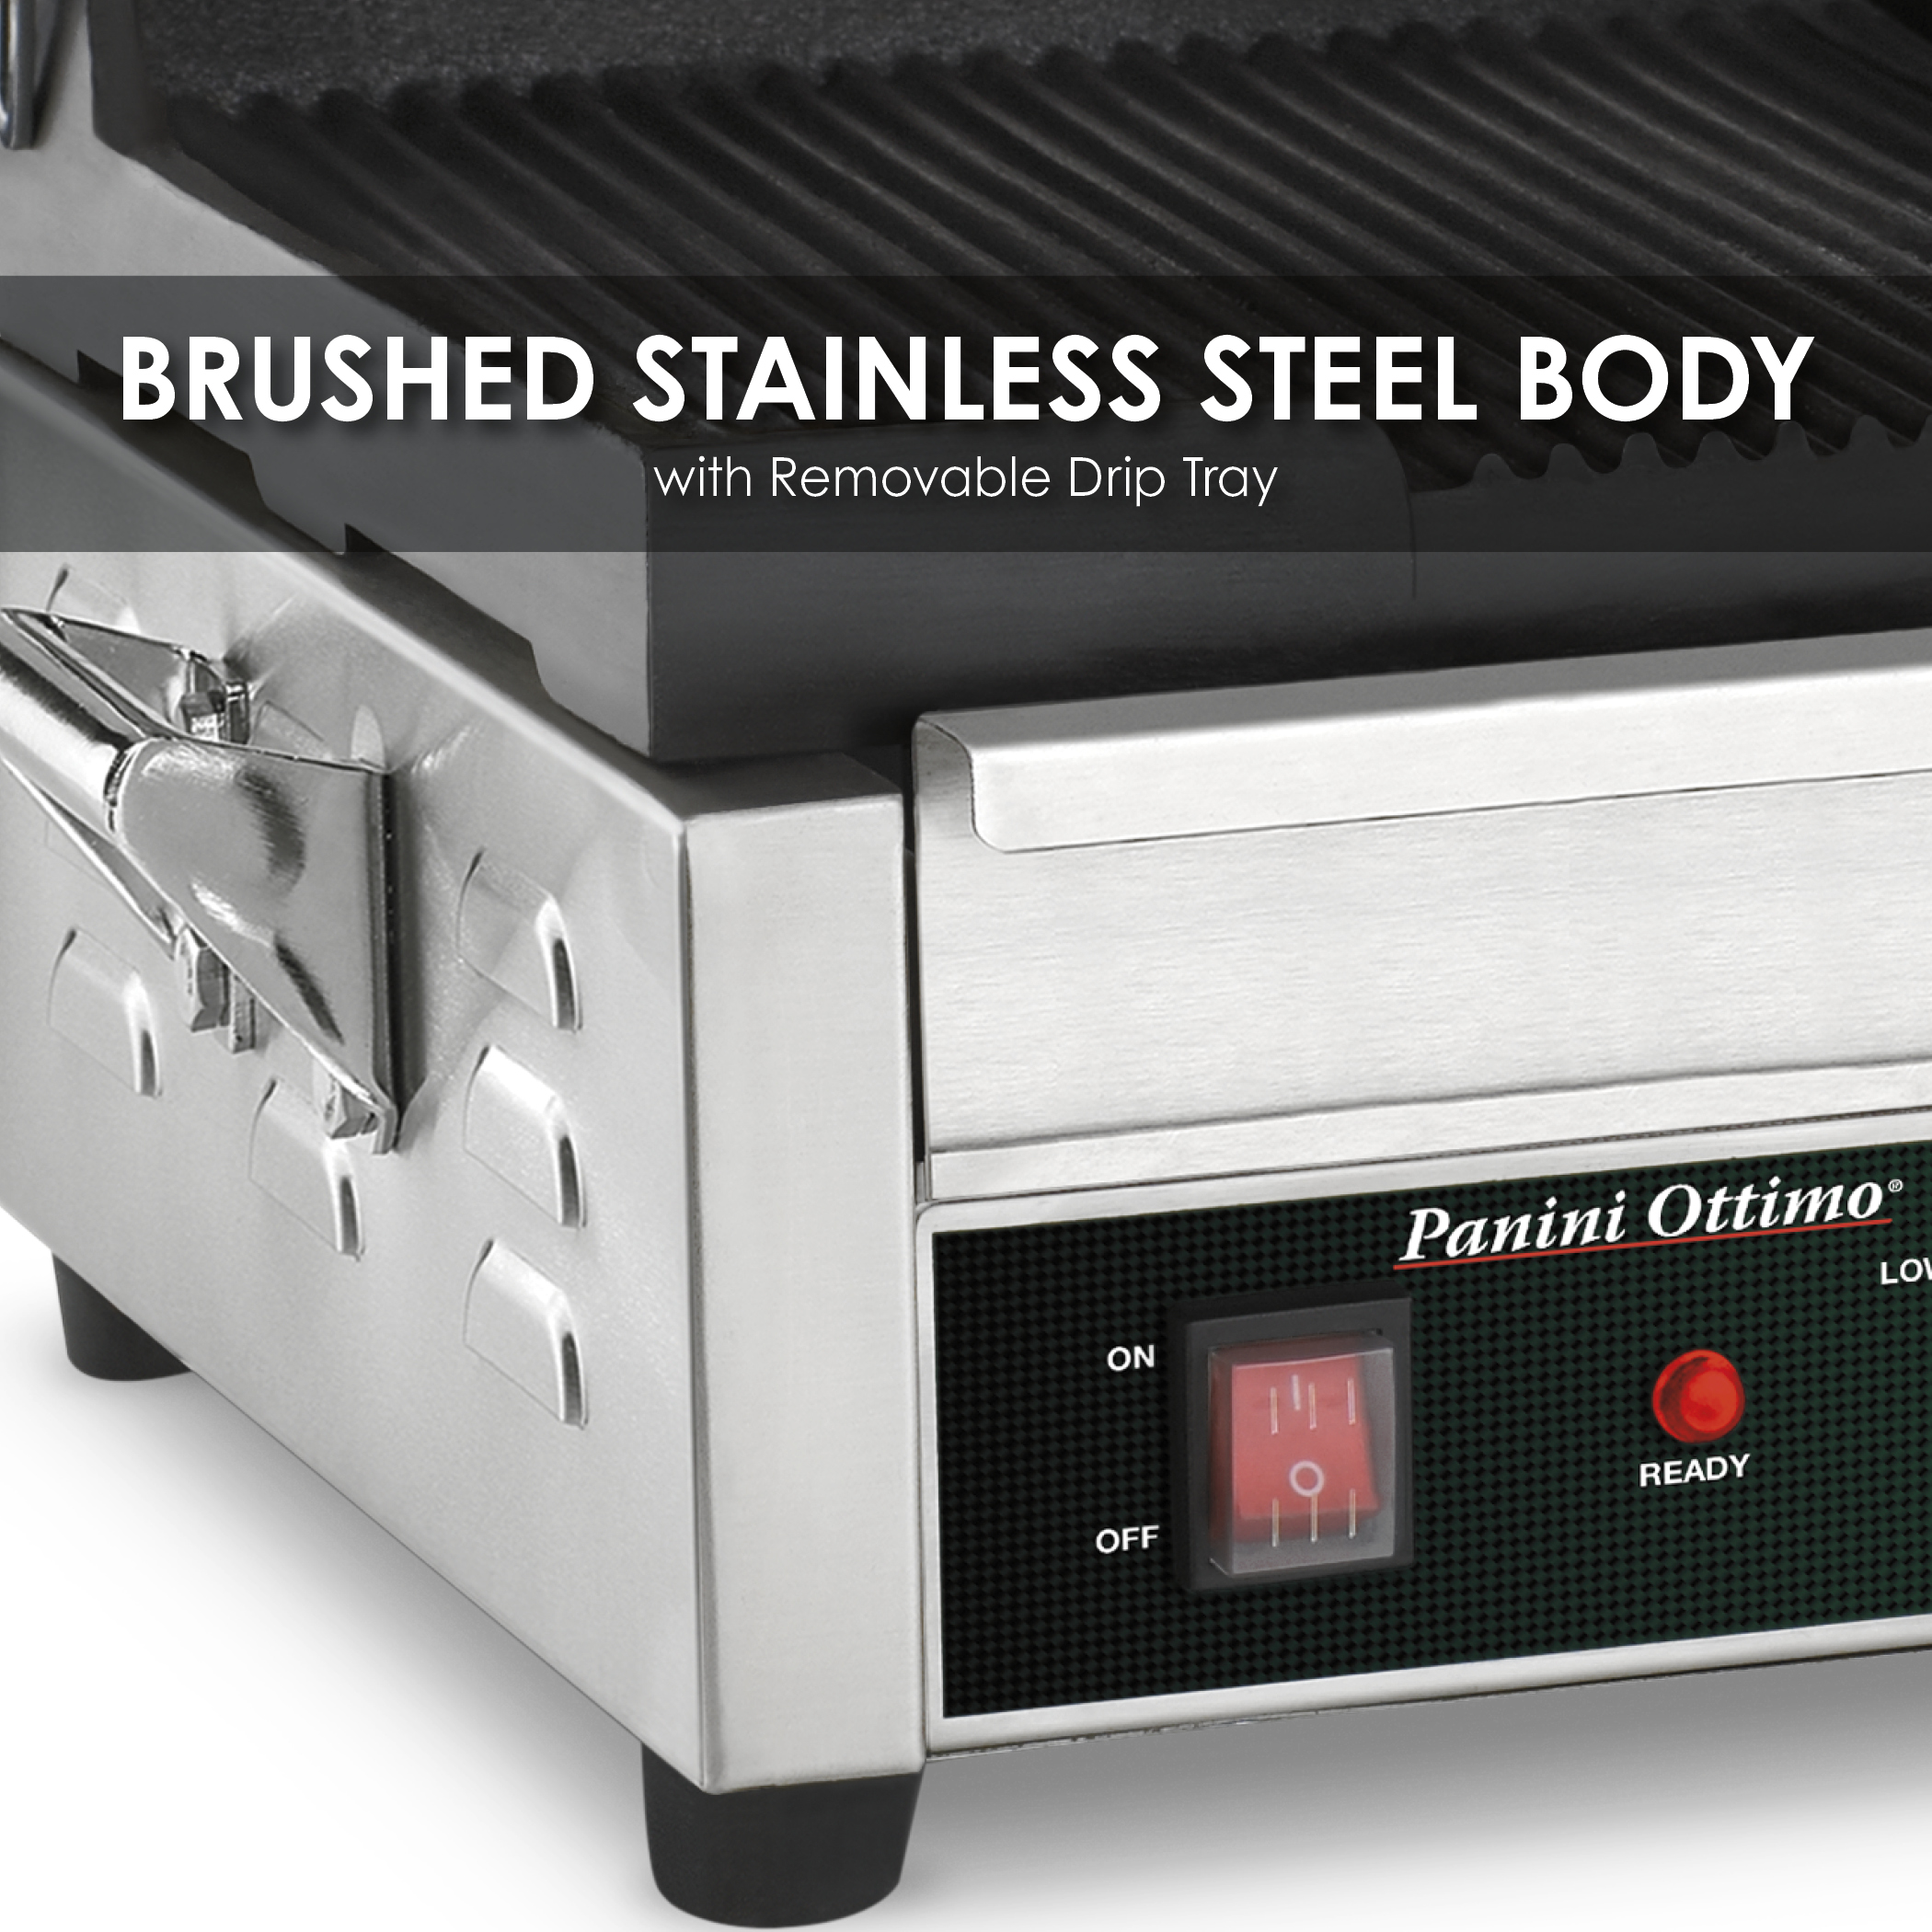 Waring Commercial - Double Italian-Style Panini/Flat Grill with Timer - 240T